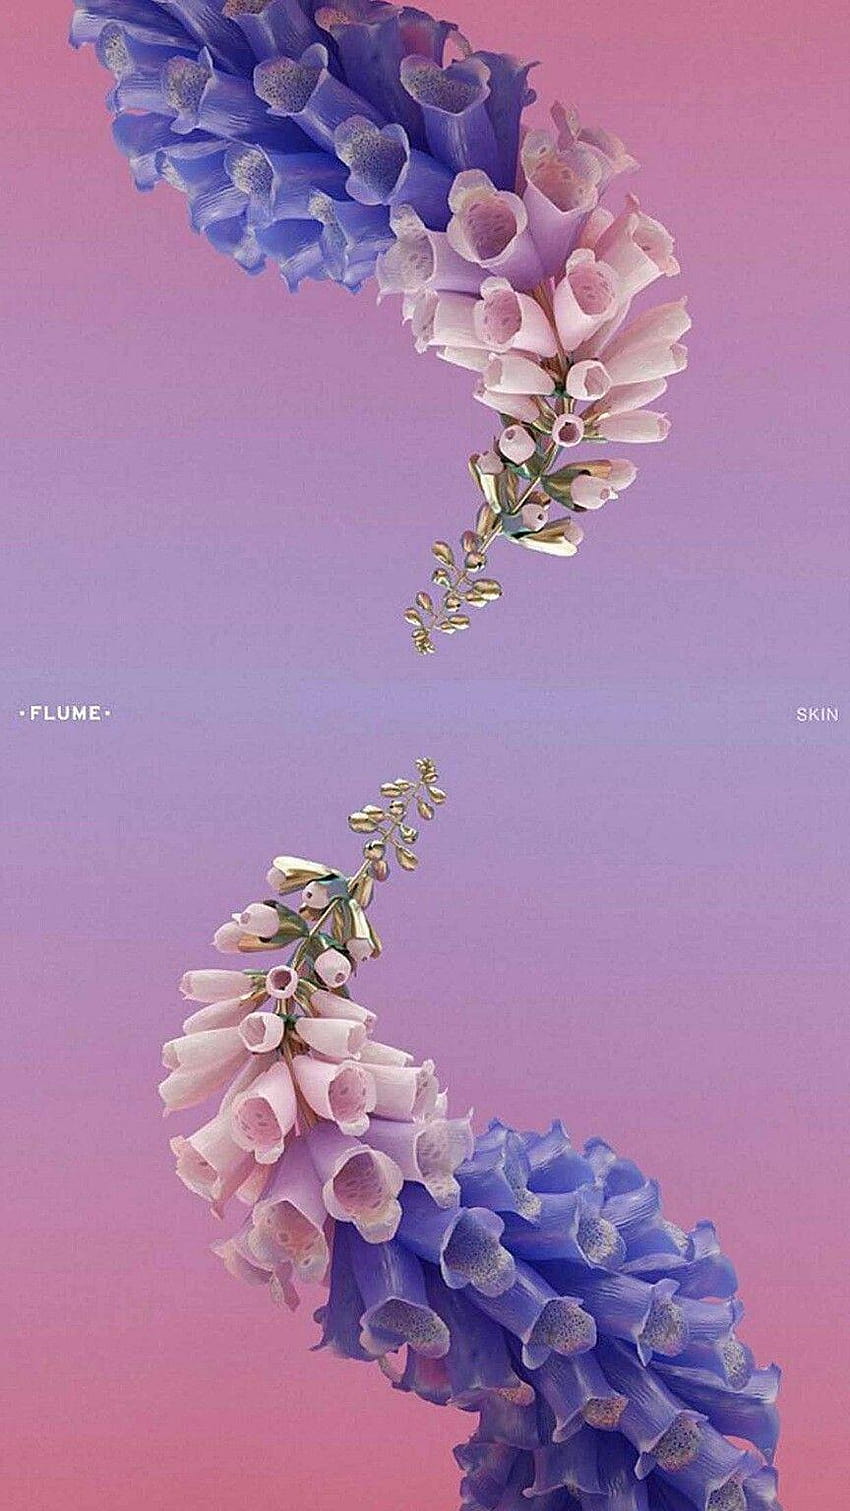 Emily Neal on I like the way it looks, flume iphone HD phone wallpaper